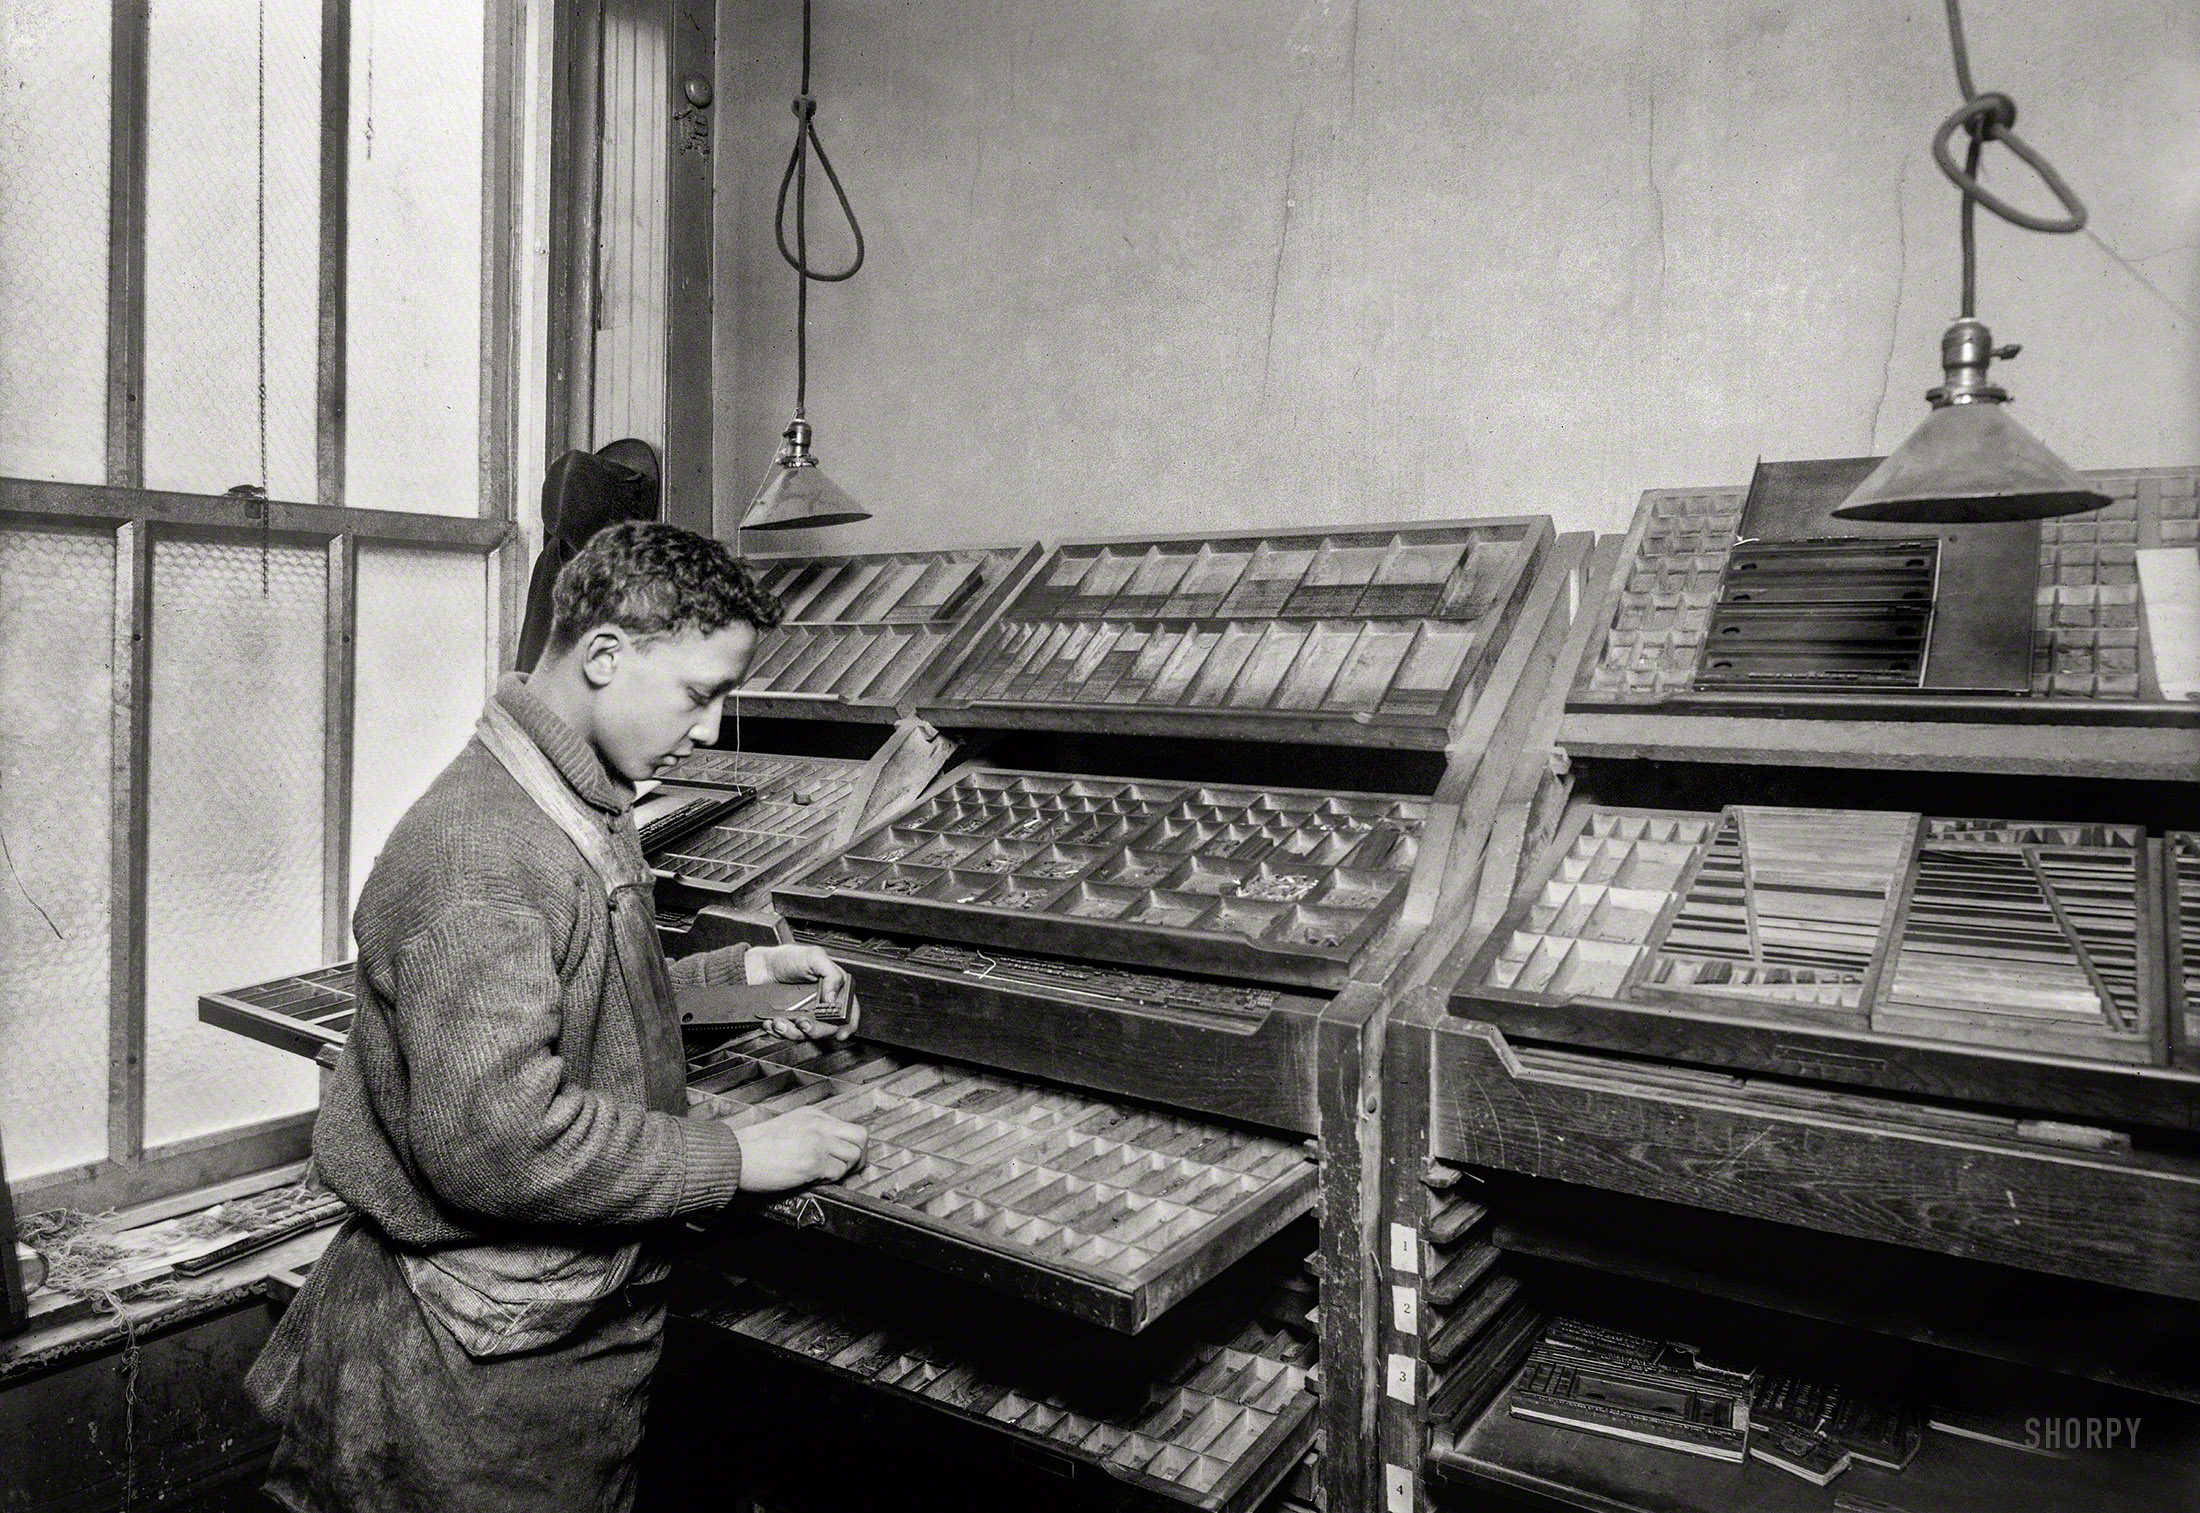 February 1917. New York. "Louis Gitney, a young compositor earning $7 a week in a Sixth Avenue (N.Y.) printing office. He learned the trade at Public School 64." 5x7 inch glass negative by Lewis Wickes Hine. View full size.